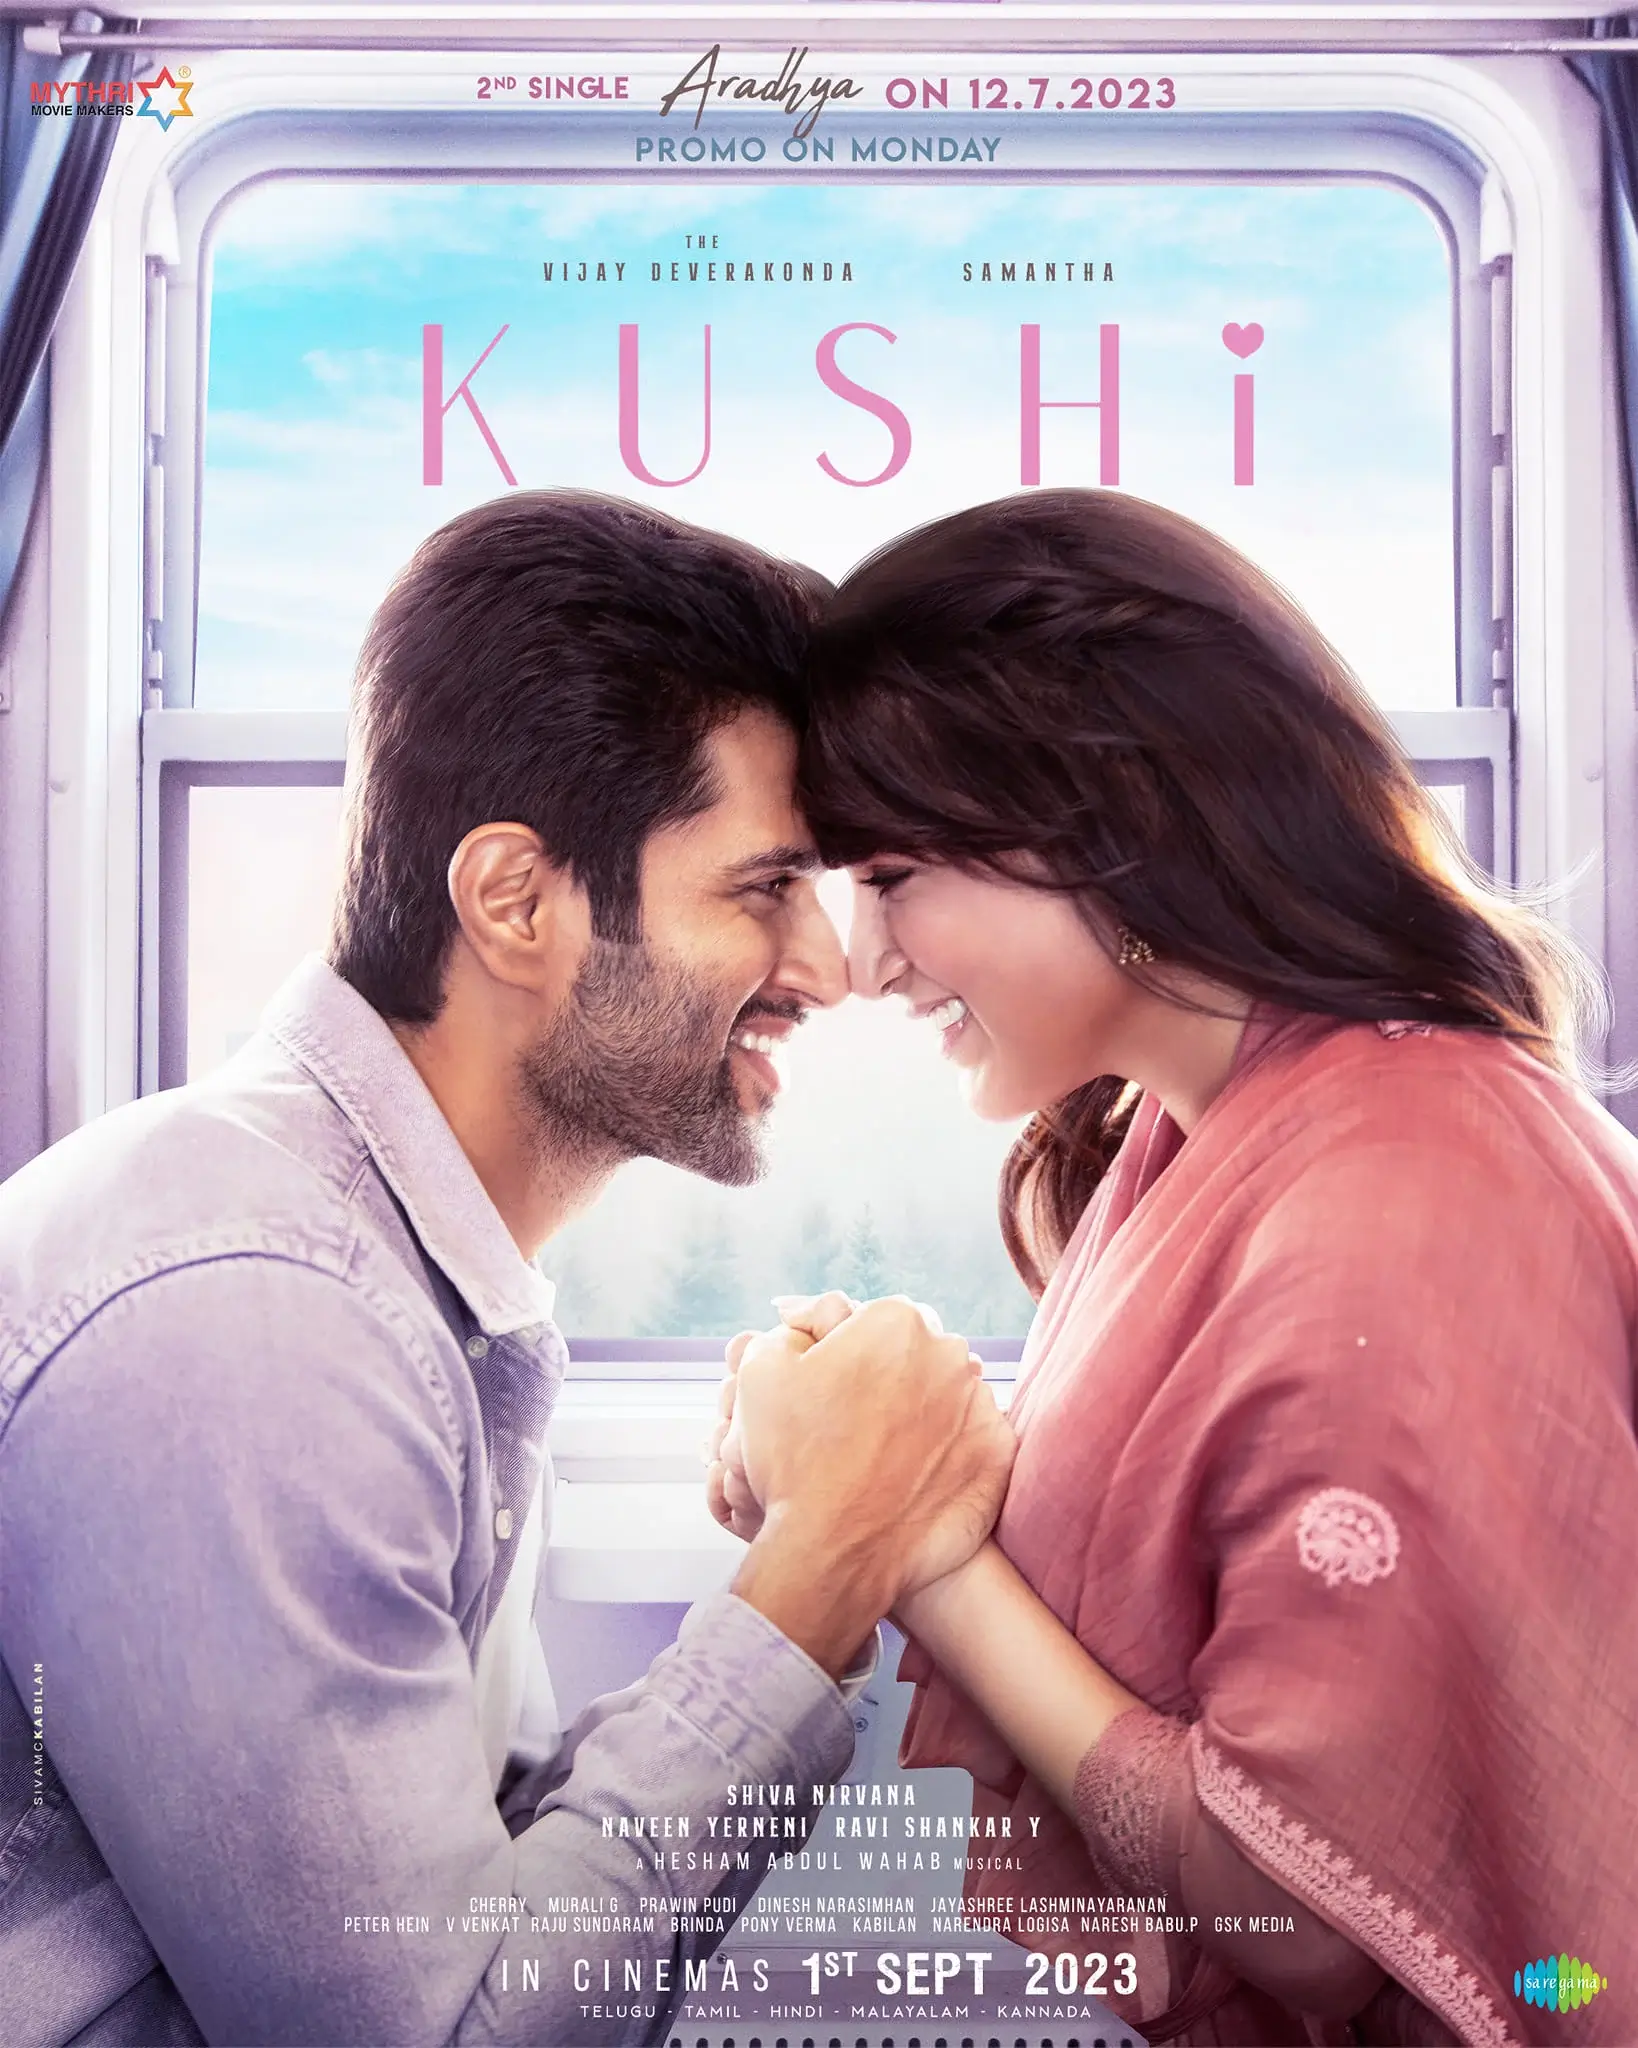 Kushi Movie (2023): Cast, Roles, Trailer, Story, Release Date, Poster